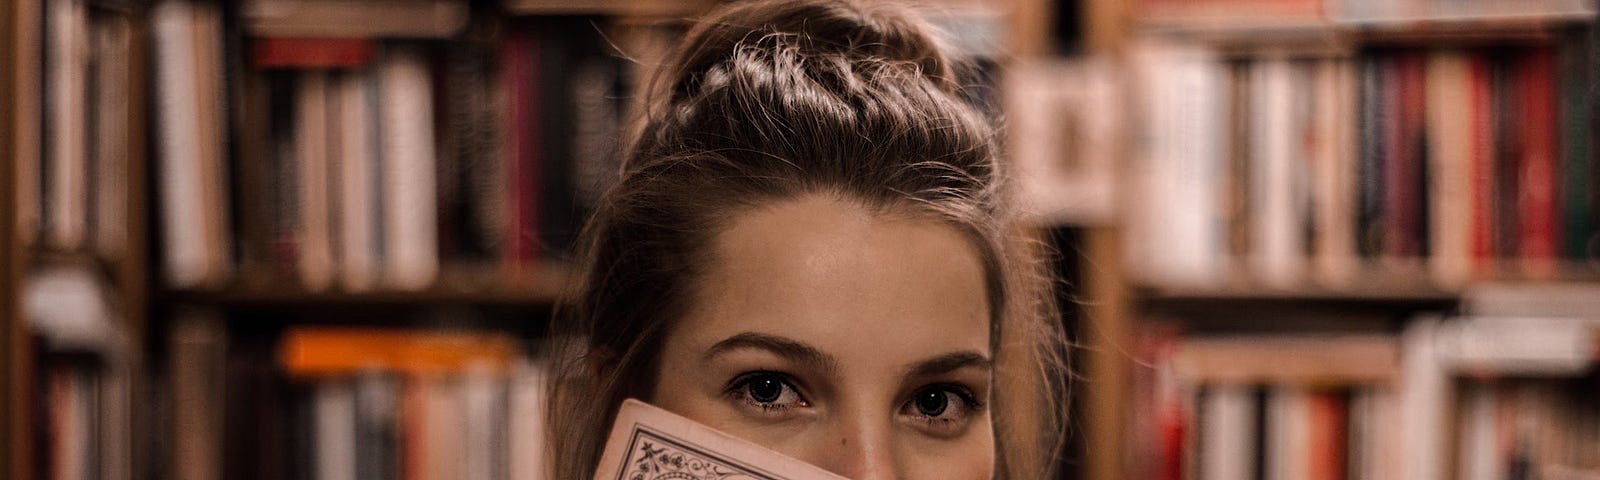 A stock photo of a young woman holding a record of Johann Strauss’ Die Fledermaus. Presumably, she is in a library as there is a bookshelf in the background.